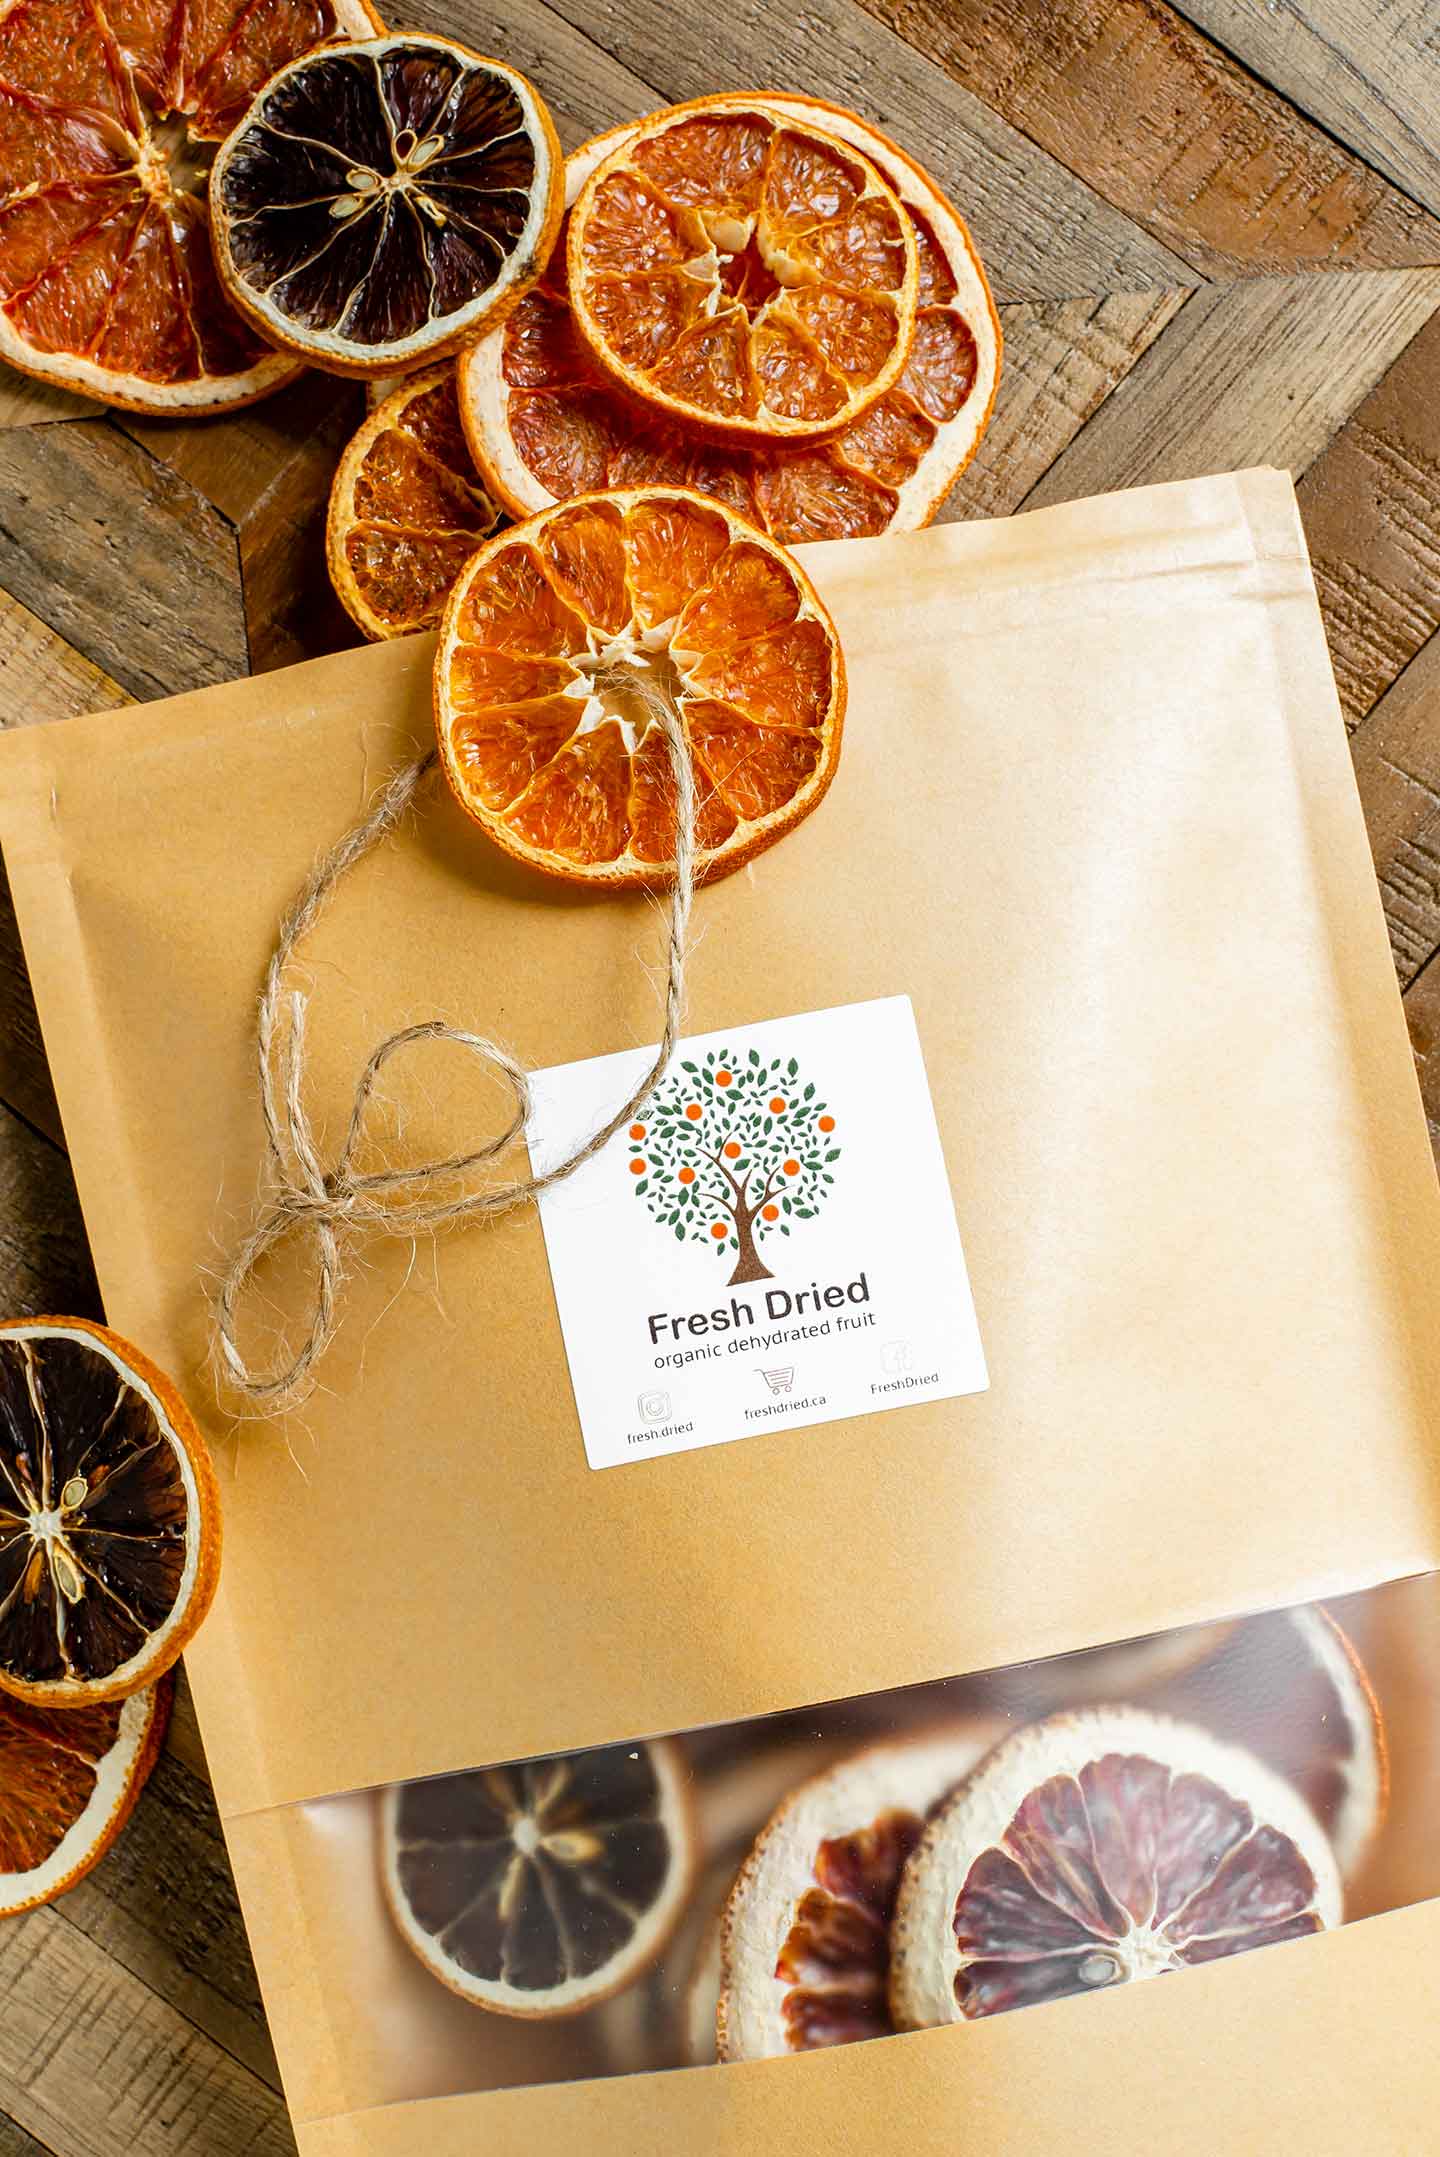 Top down view of a paper pouch with a sticker from the company "Fresh Dried". Dried slices of organic citrus fruit spill out of the bag and one has a piece of twine threaded through the centre to create a hanging decoration.